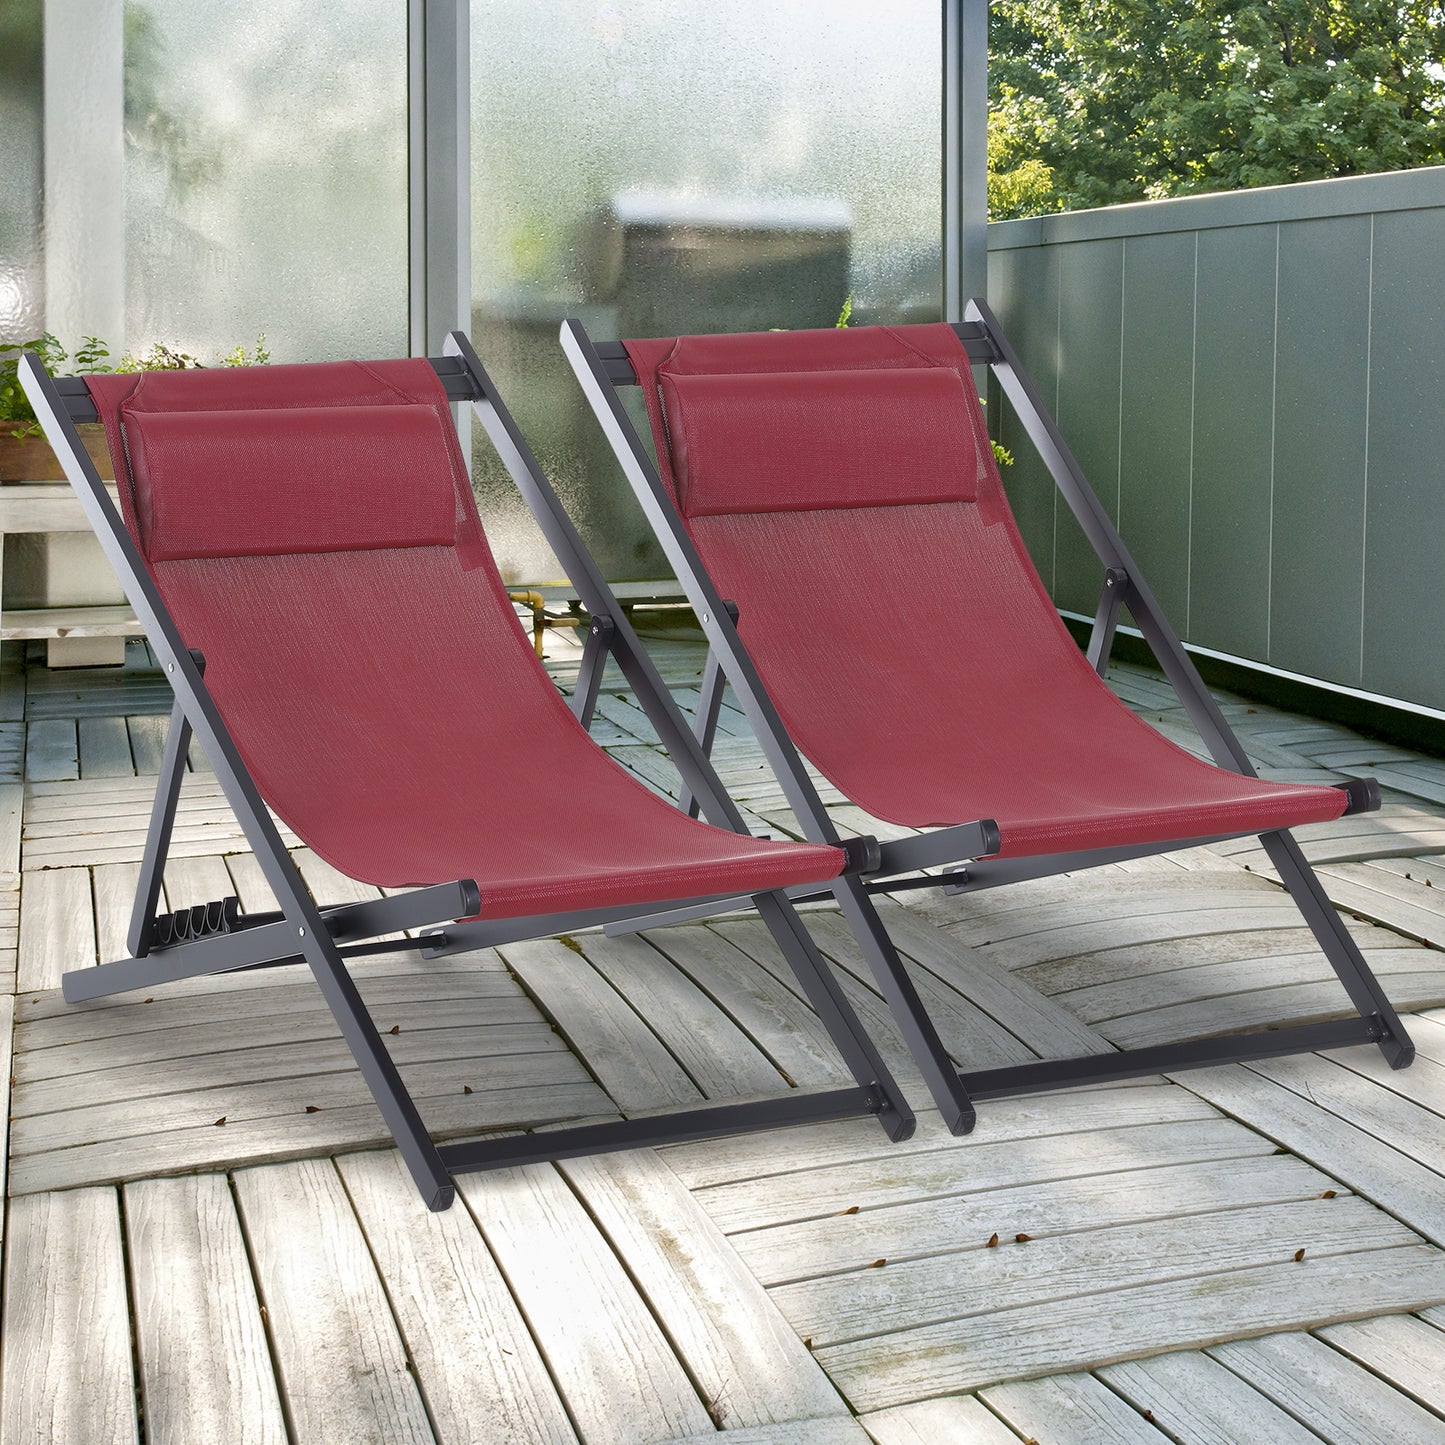 Outsunny Garden Deck Chairs, Set of 2, Folding, Portable for Beach/Patio, Durable, Red